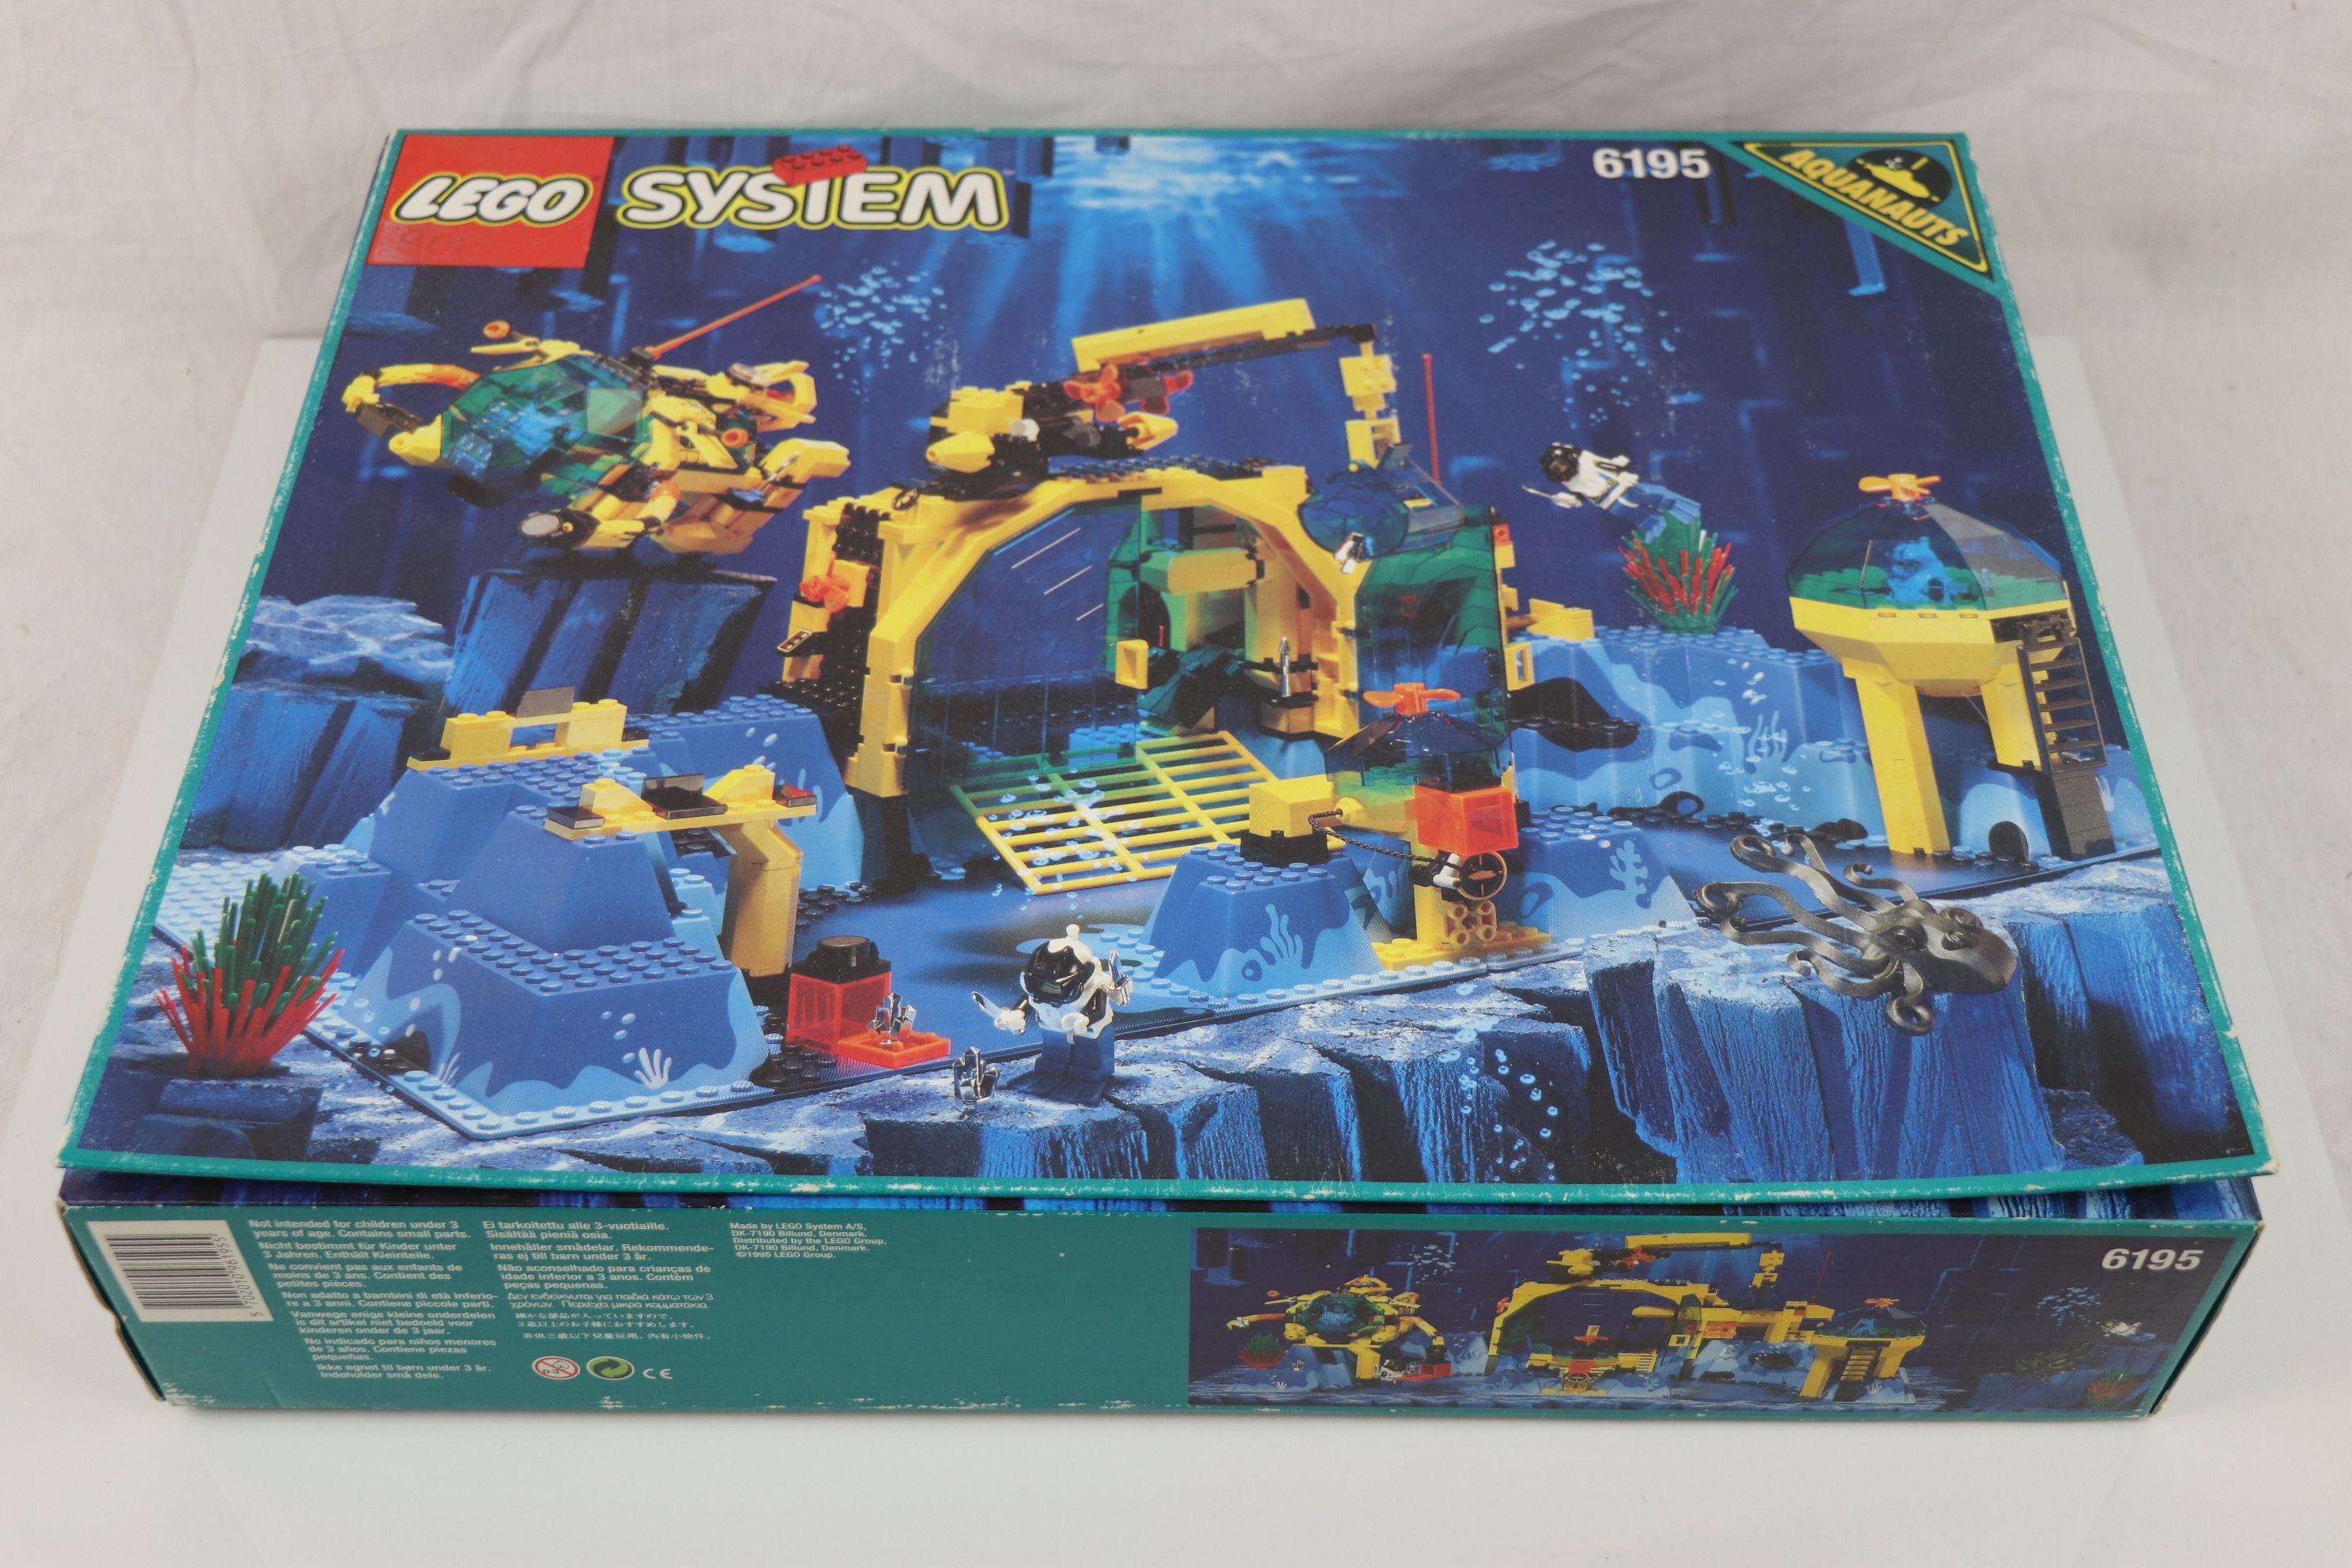 Lego - Boxed Lego System 6195 Aquanauts Neptune Discovery set unchecked but appearing complete - Image 2 of 16